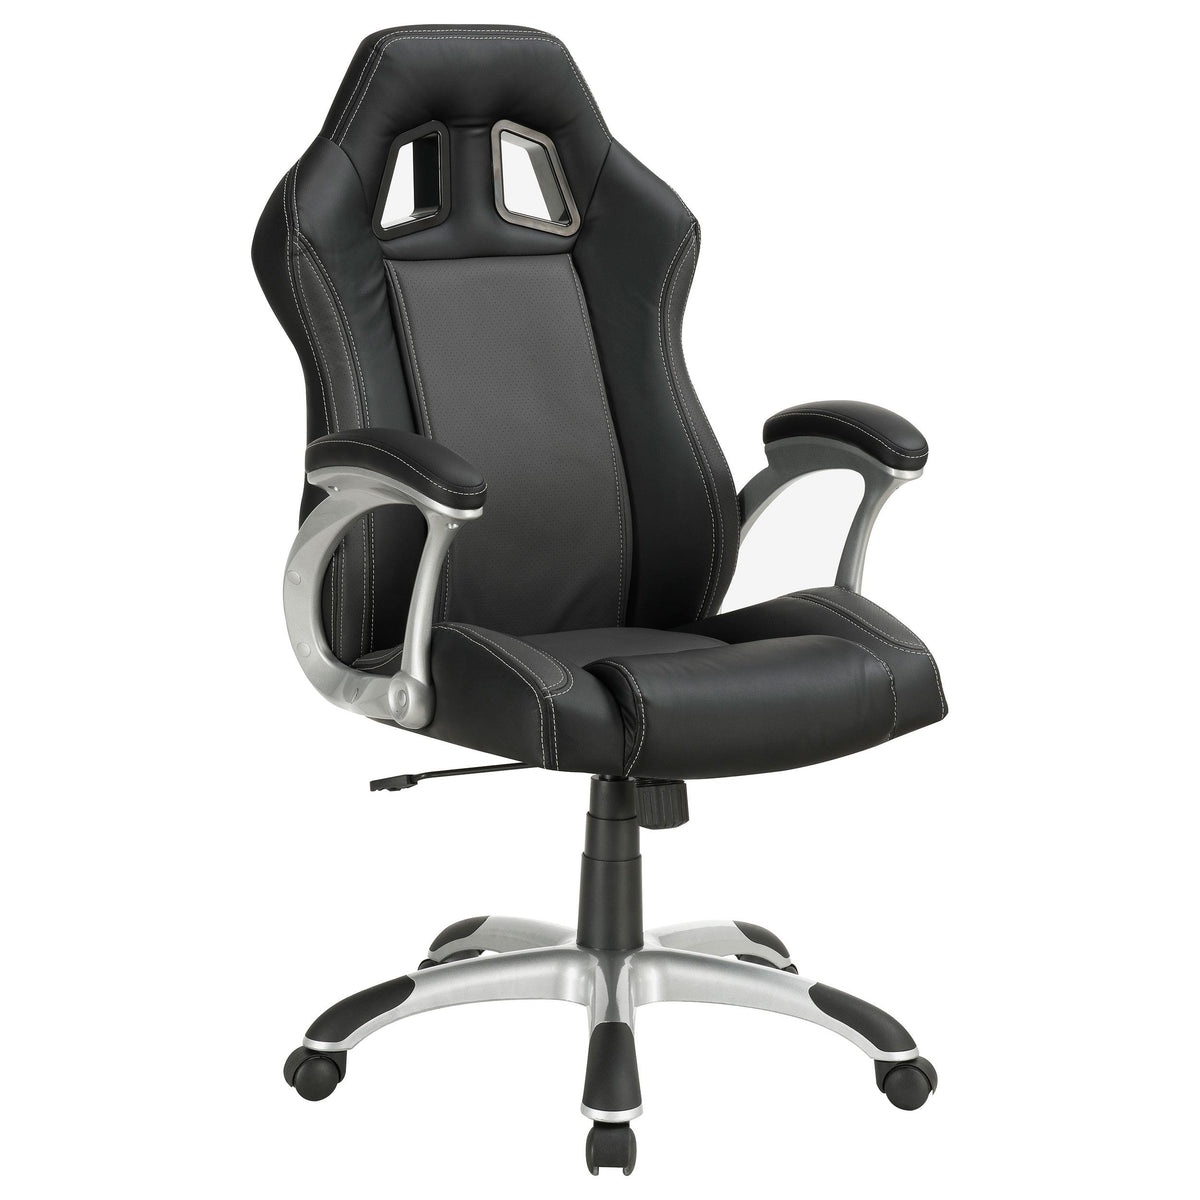 Roger Adjustable Height Office Chair Black and Grey Roger Adjustable Height Office Chair Black and Grey Half Price Furniture